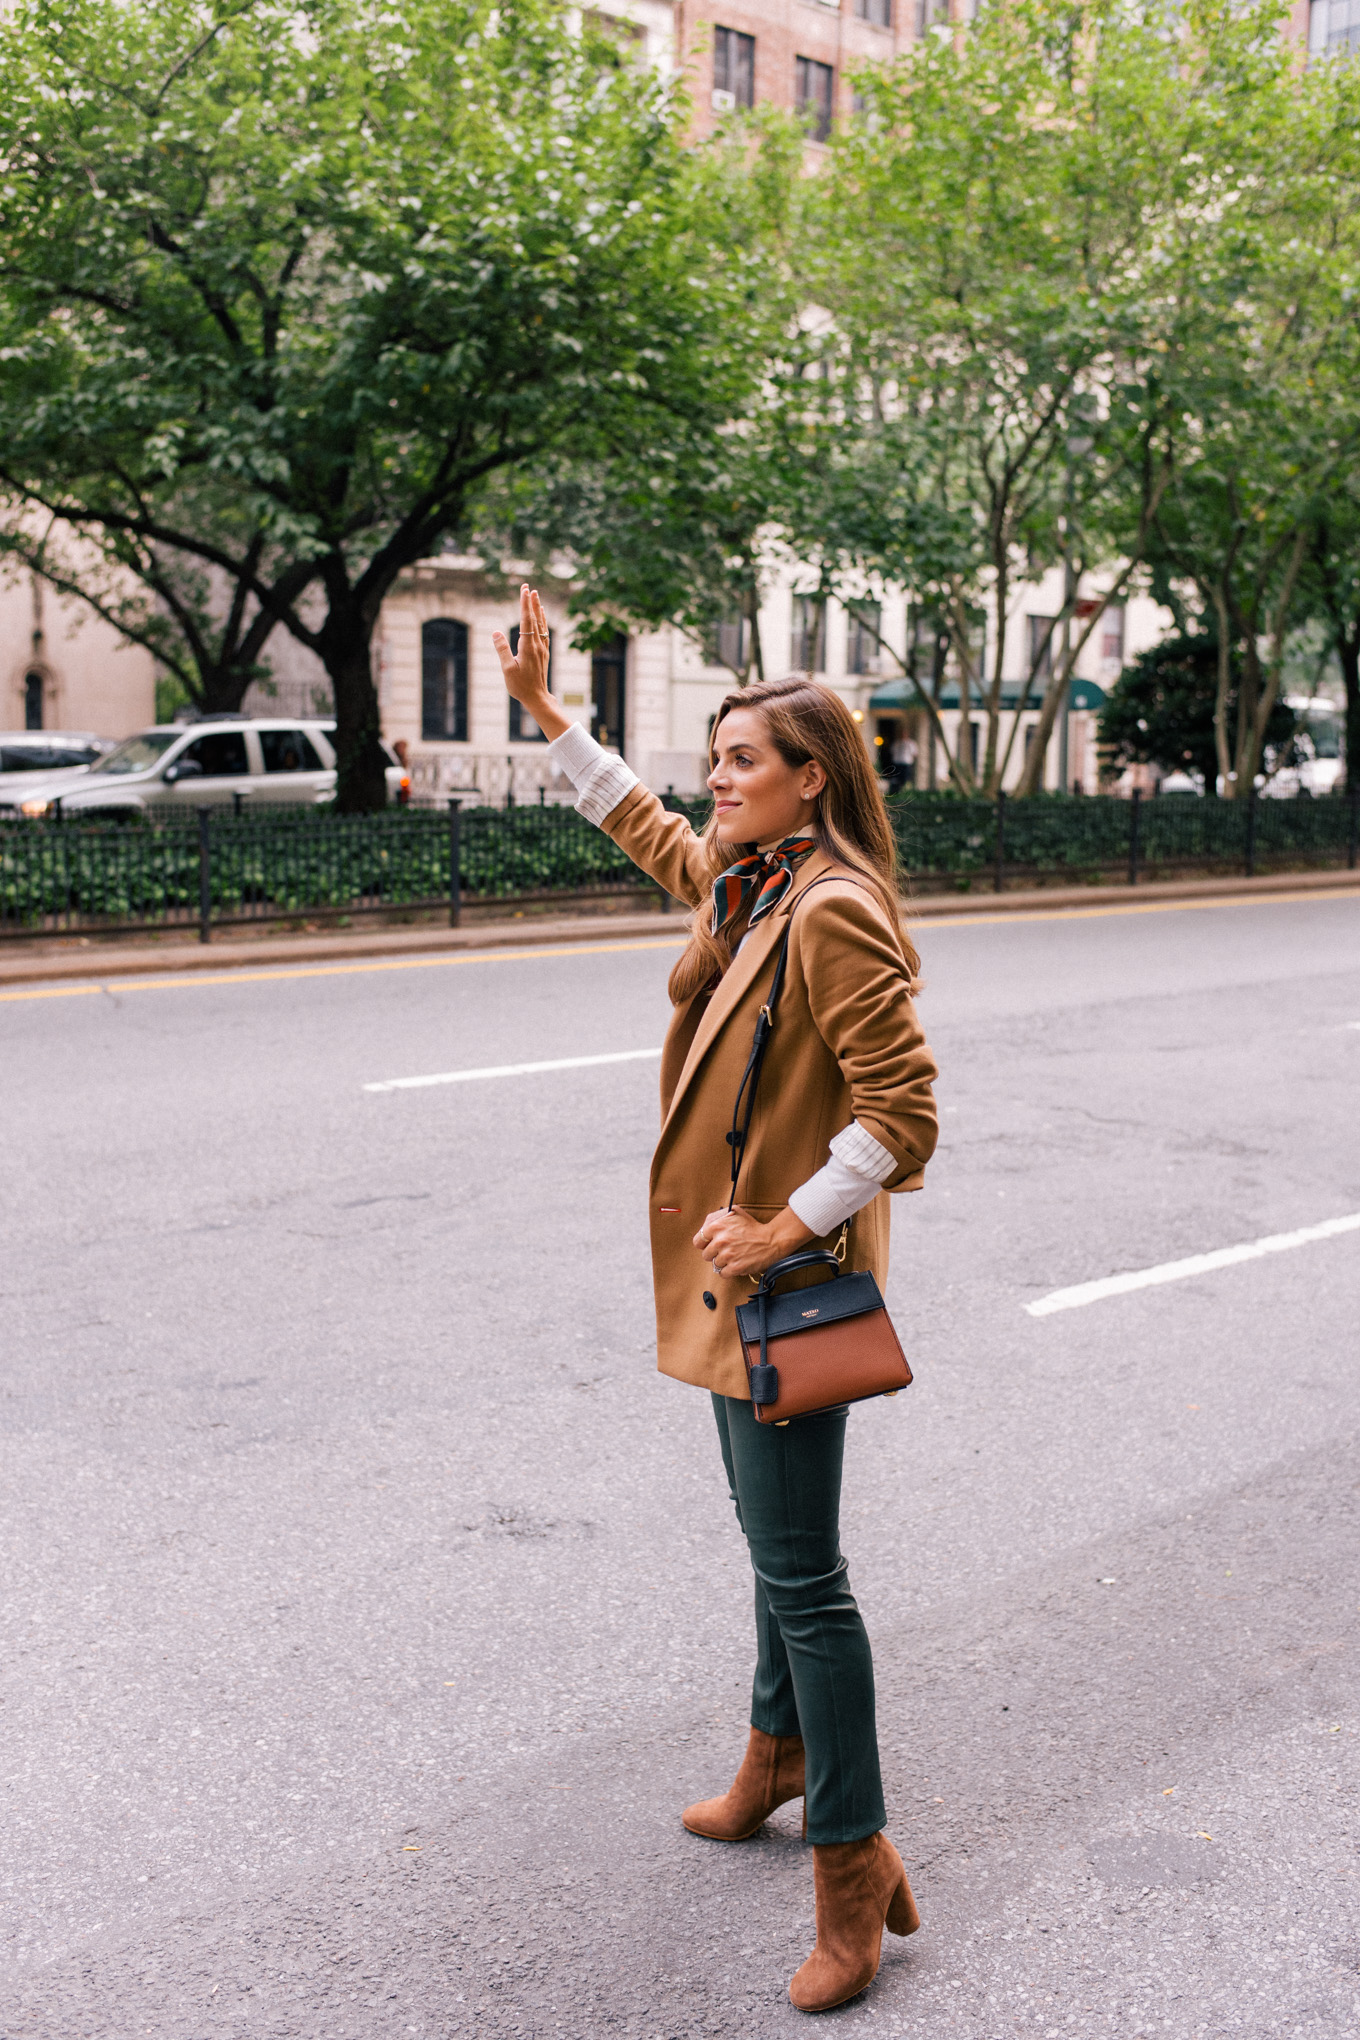 This Item Has Been Taking Over My Fall Style - Julia Berolzheimer